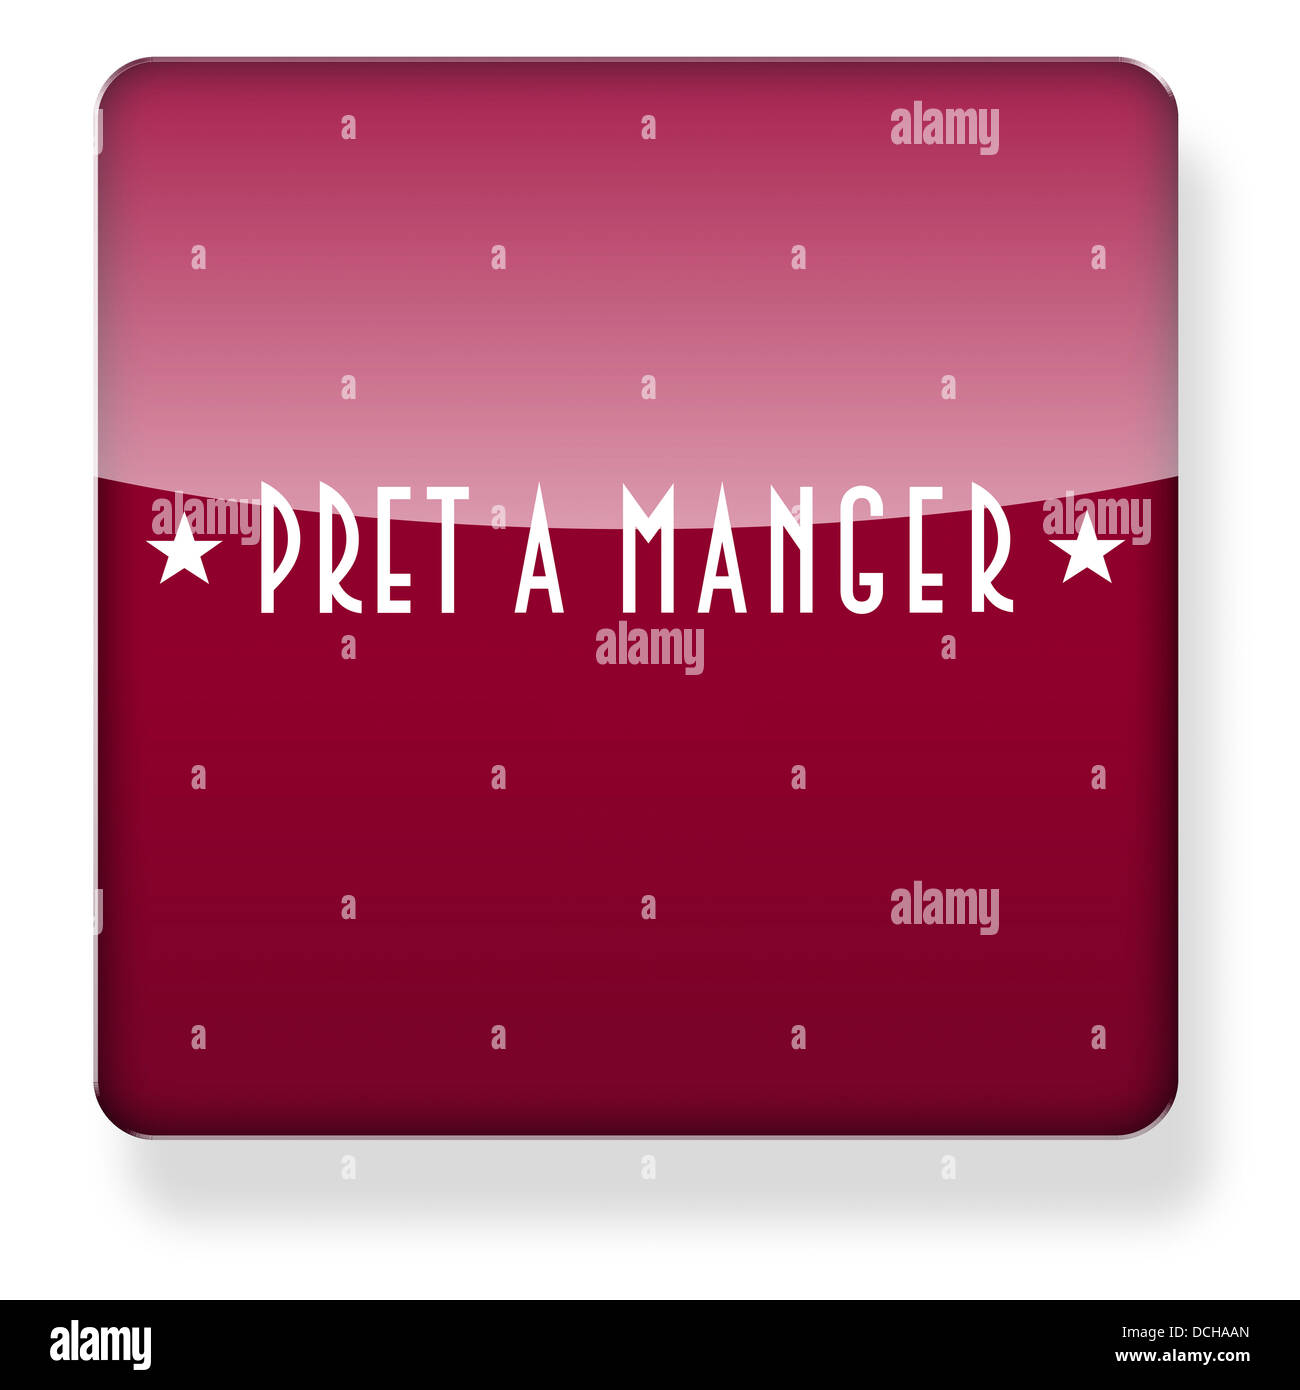 Pret a Manger logo as an app icon. Clipping path included. Stock Photo